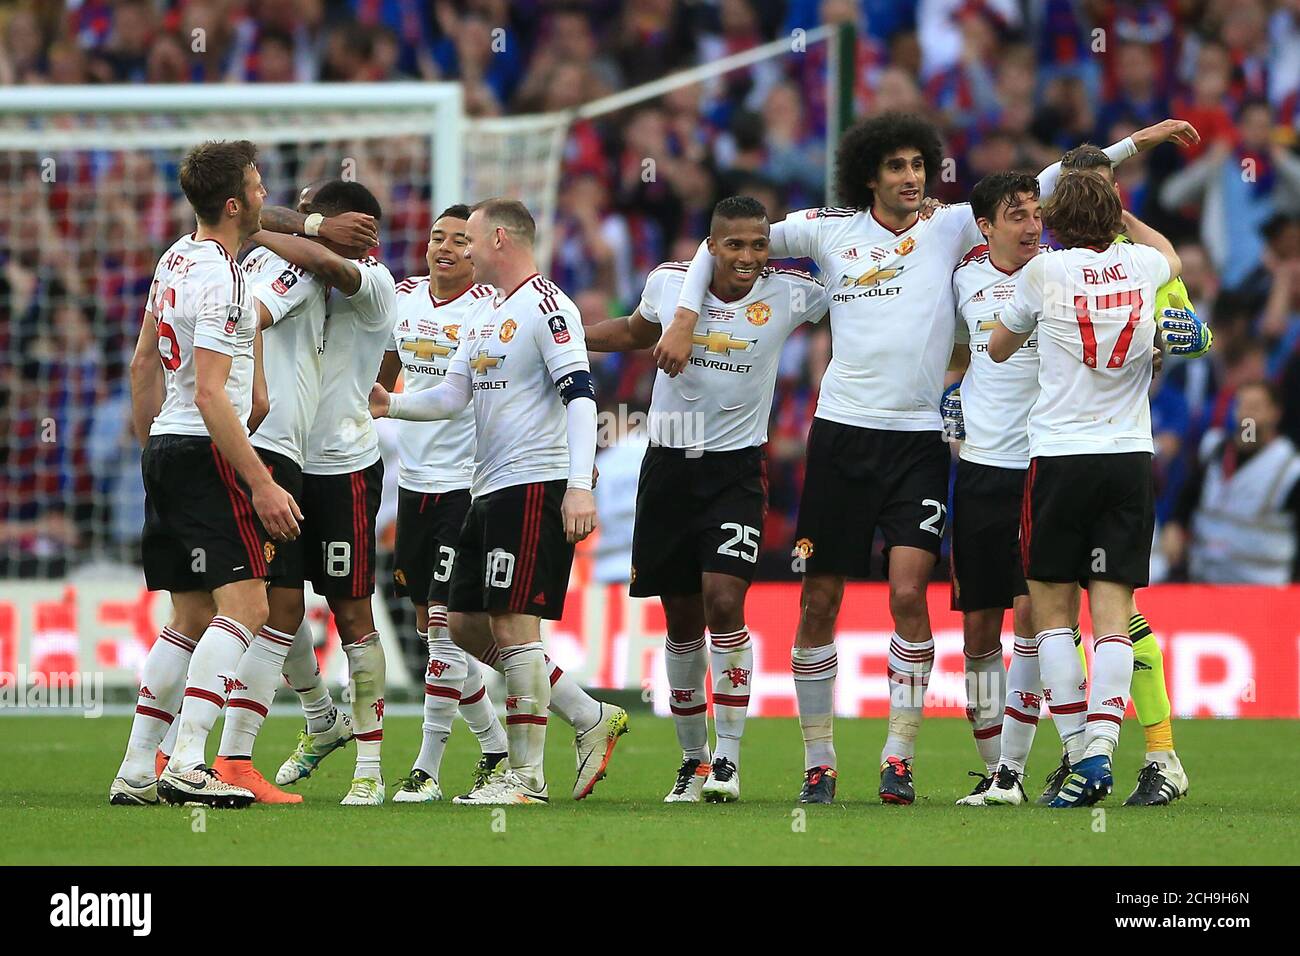 Manchester United players celebrate winning the Emirates FA Cup on the pitch after the final whistle during the Emirates FA Cup Final at Wembley Stadium